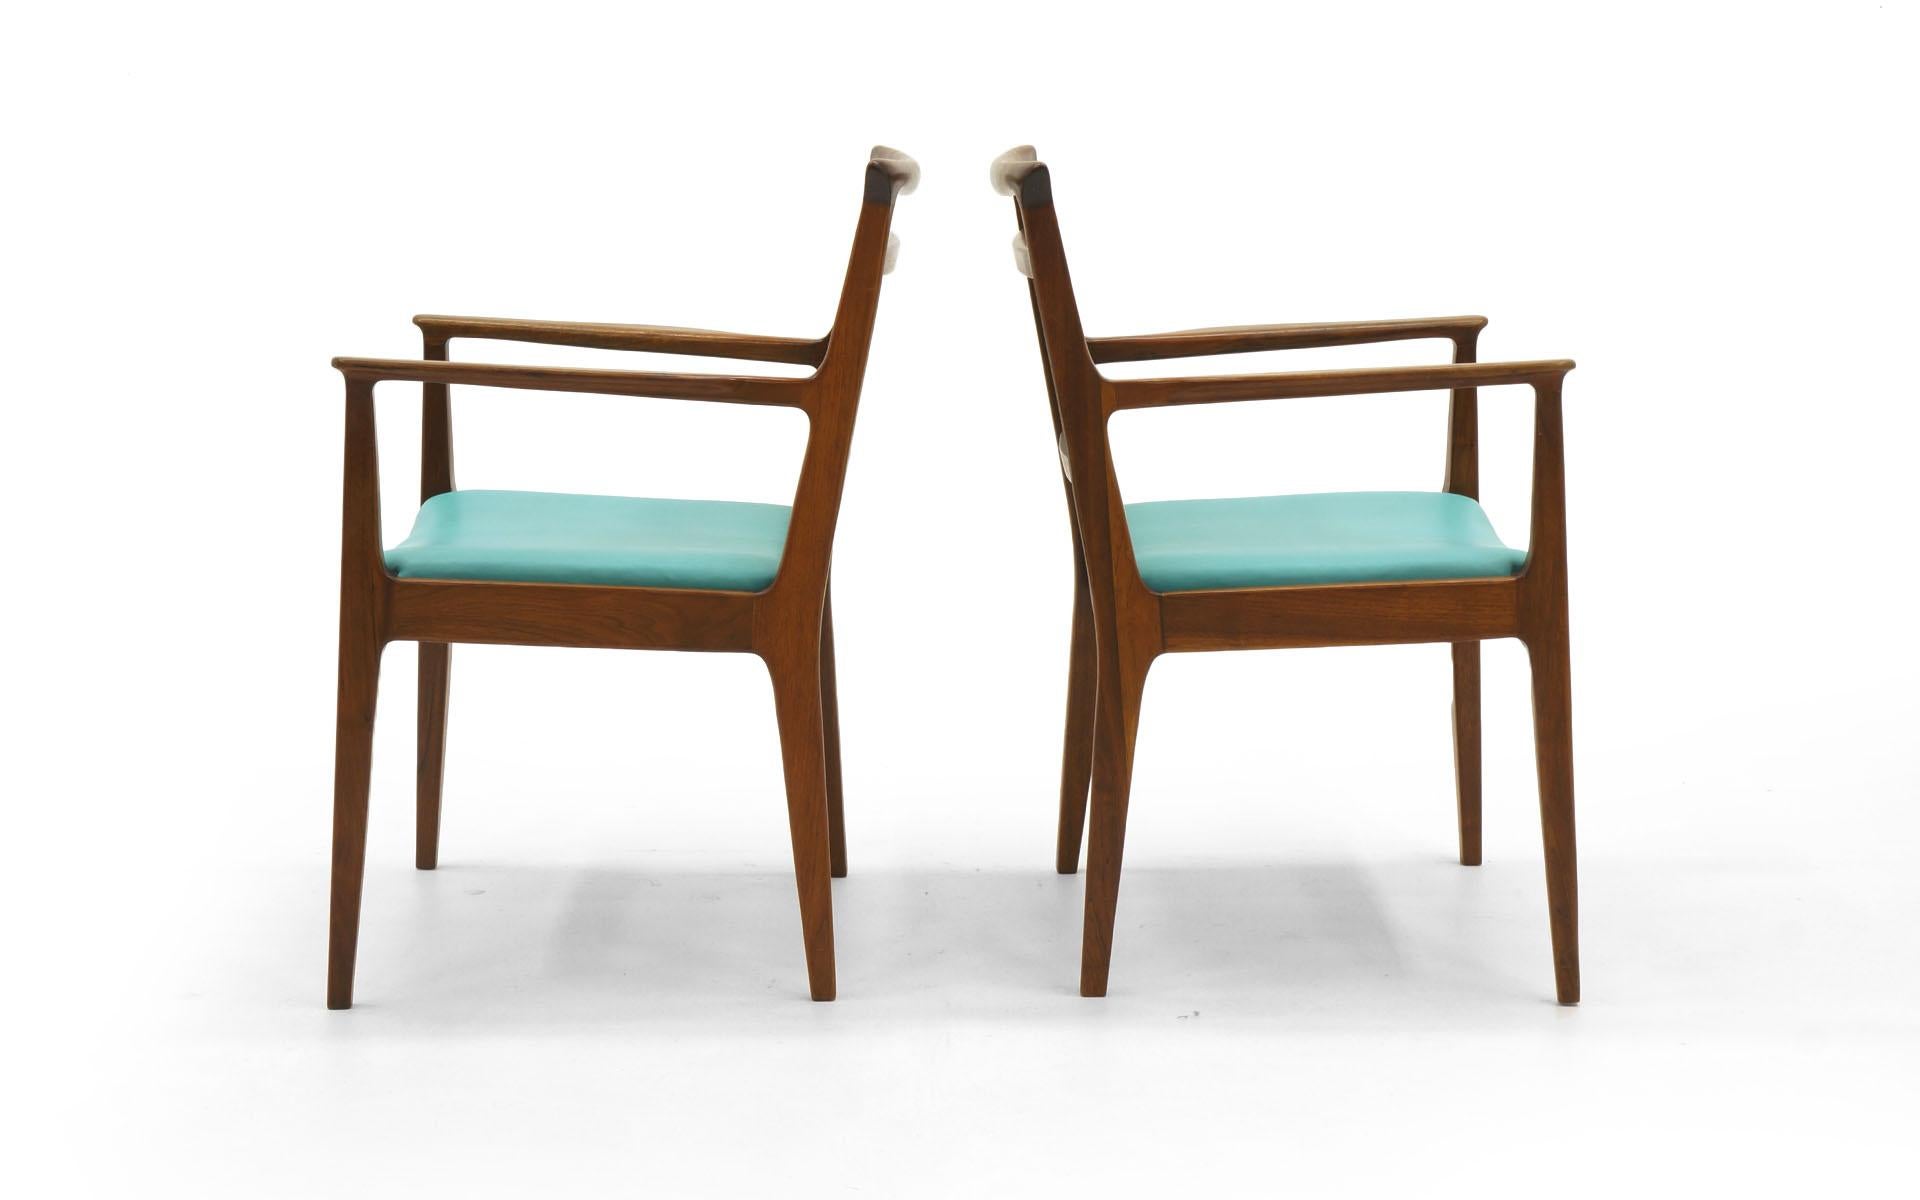 American Six Dining Chairs by Edward Wormley, Walnut Frames, Cane Backs and Blue Seats